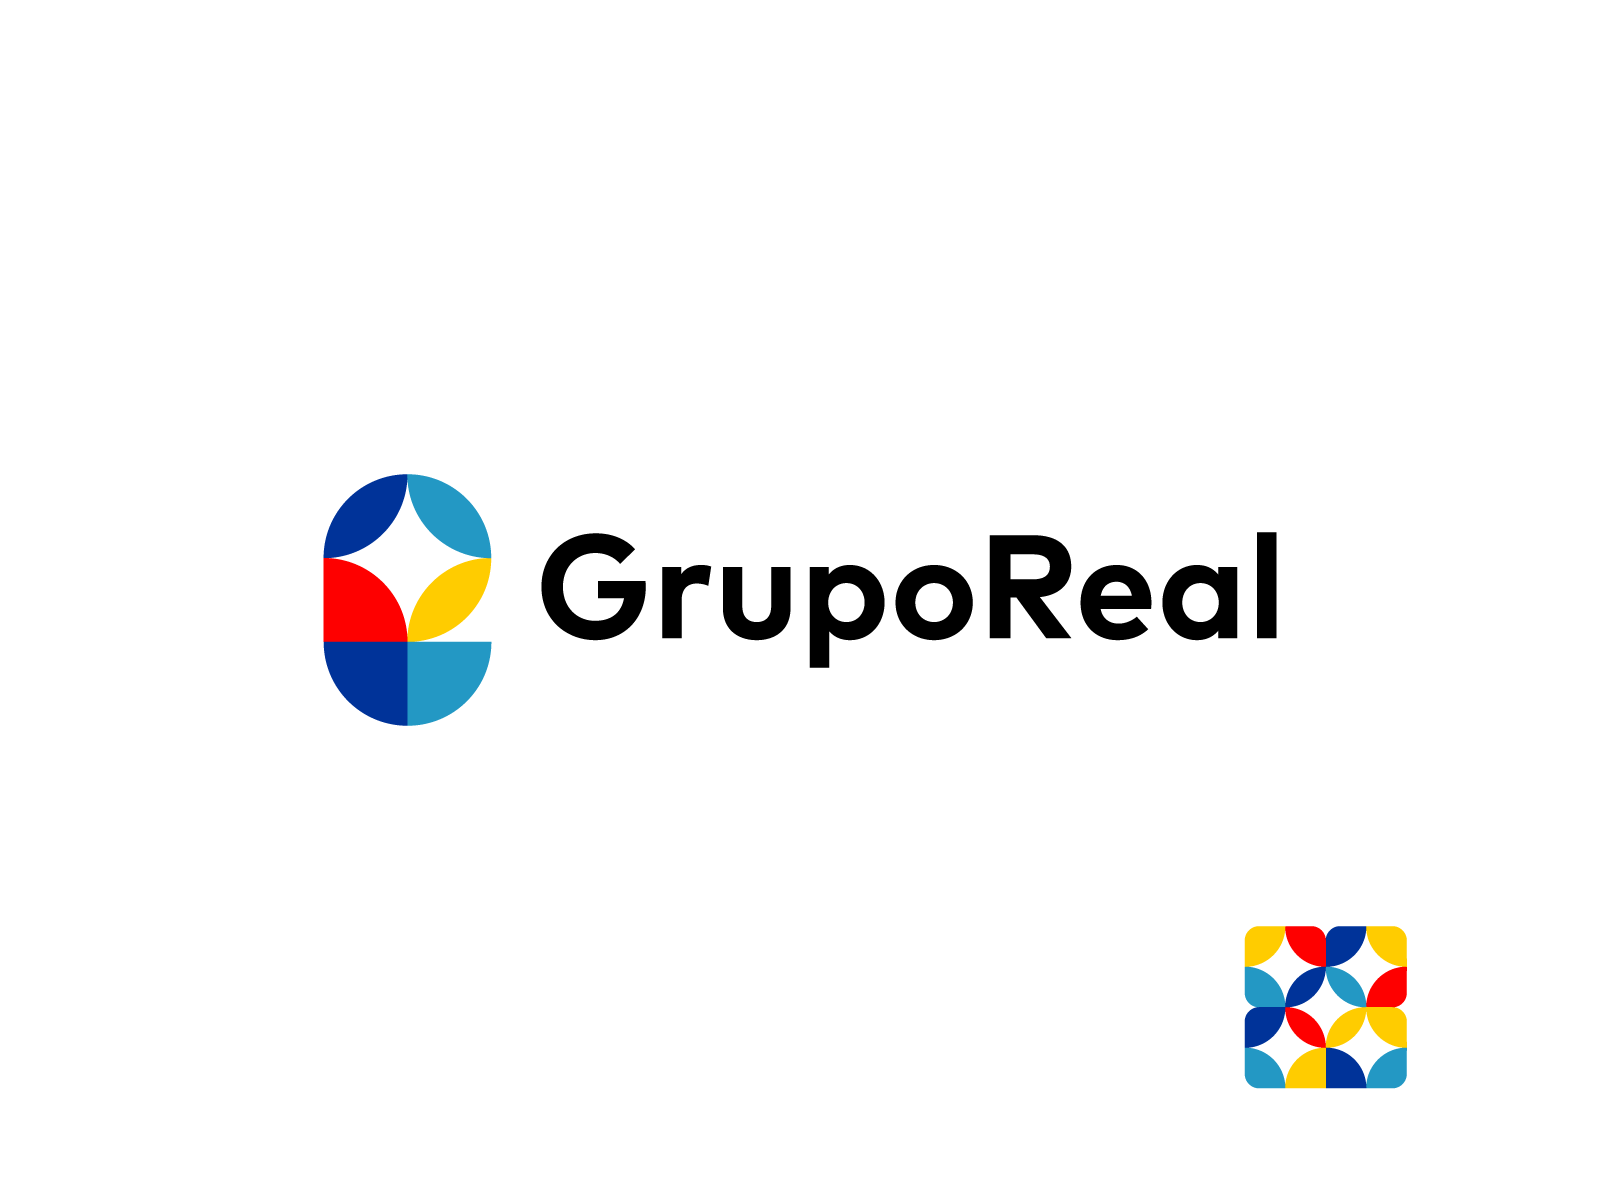 GrupoReal logo proposal by Muhammad Aslam for A Creative Agency on Dribbble